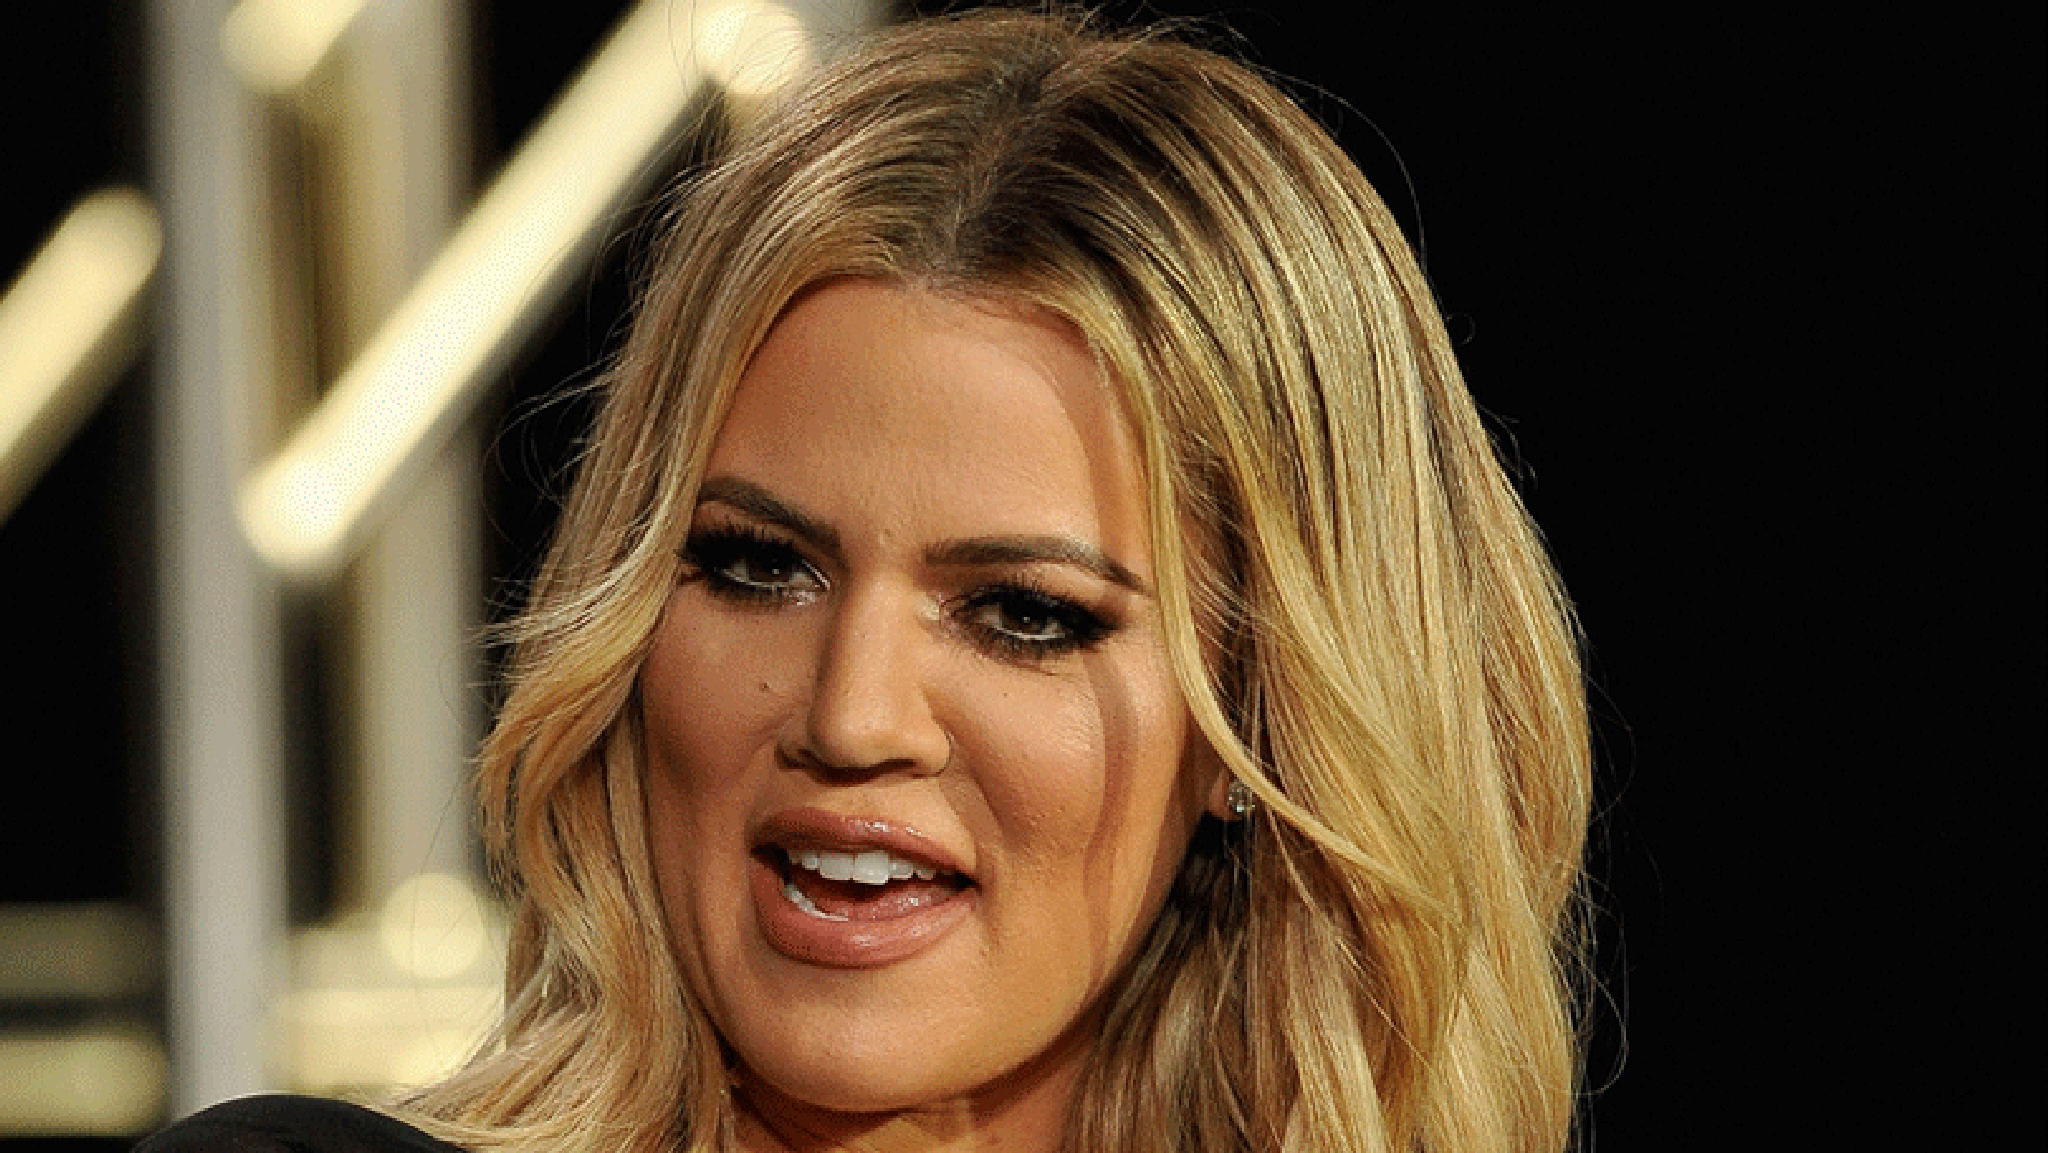 Khloe Kardashian Reveals When She Lost Her Virginity During Telling